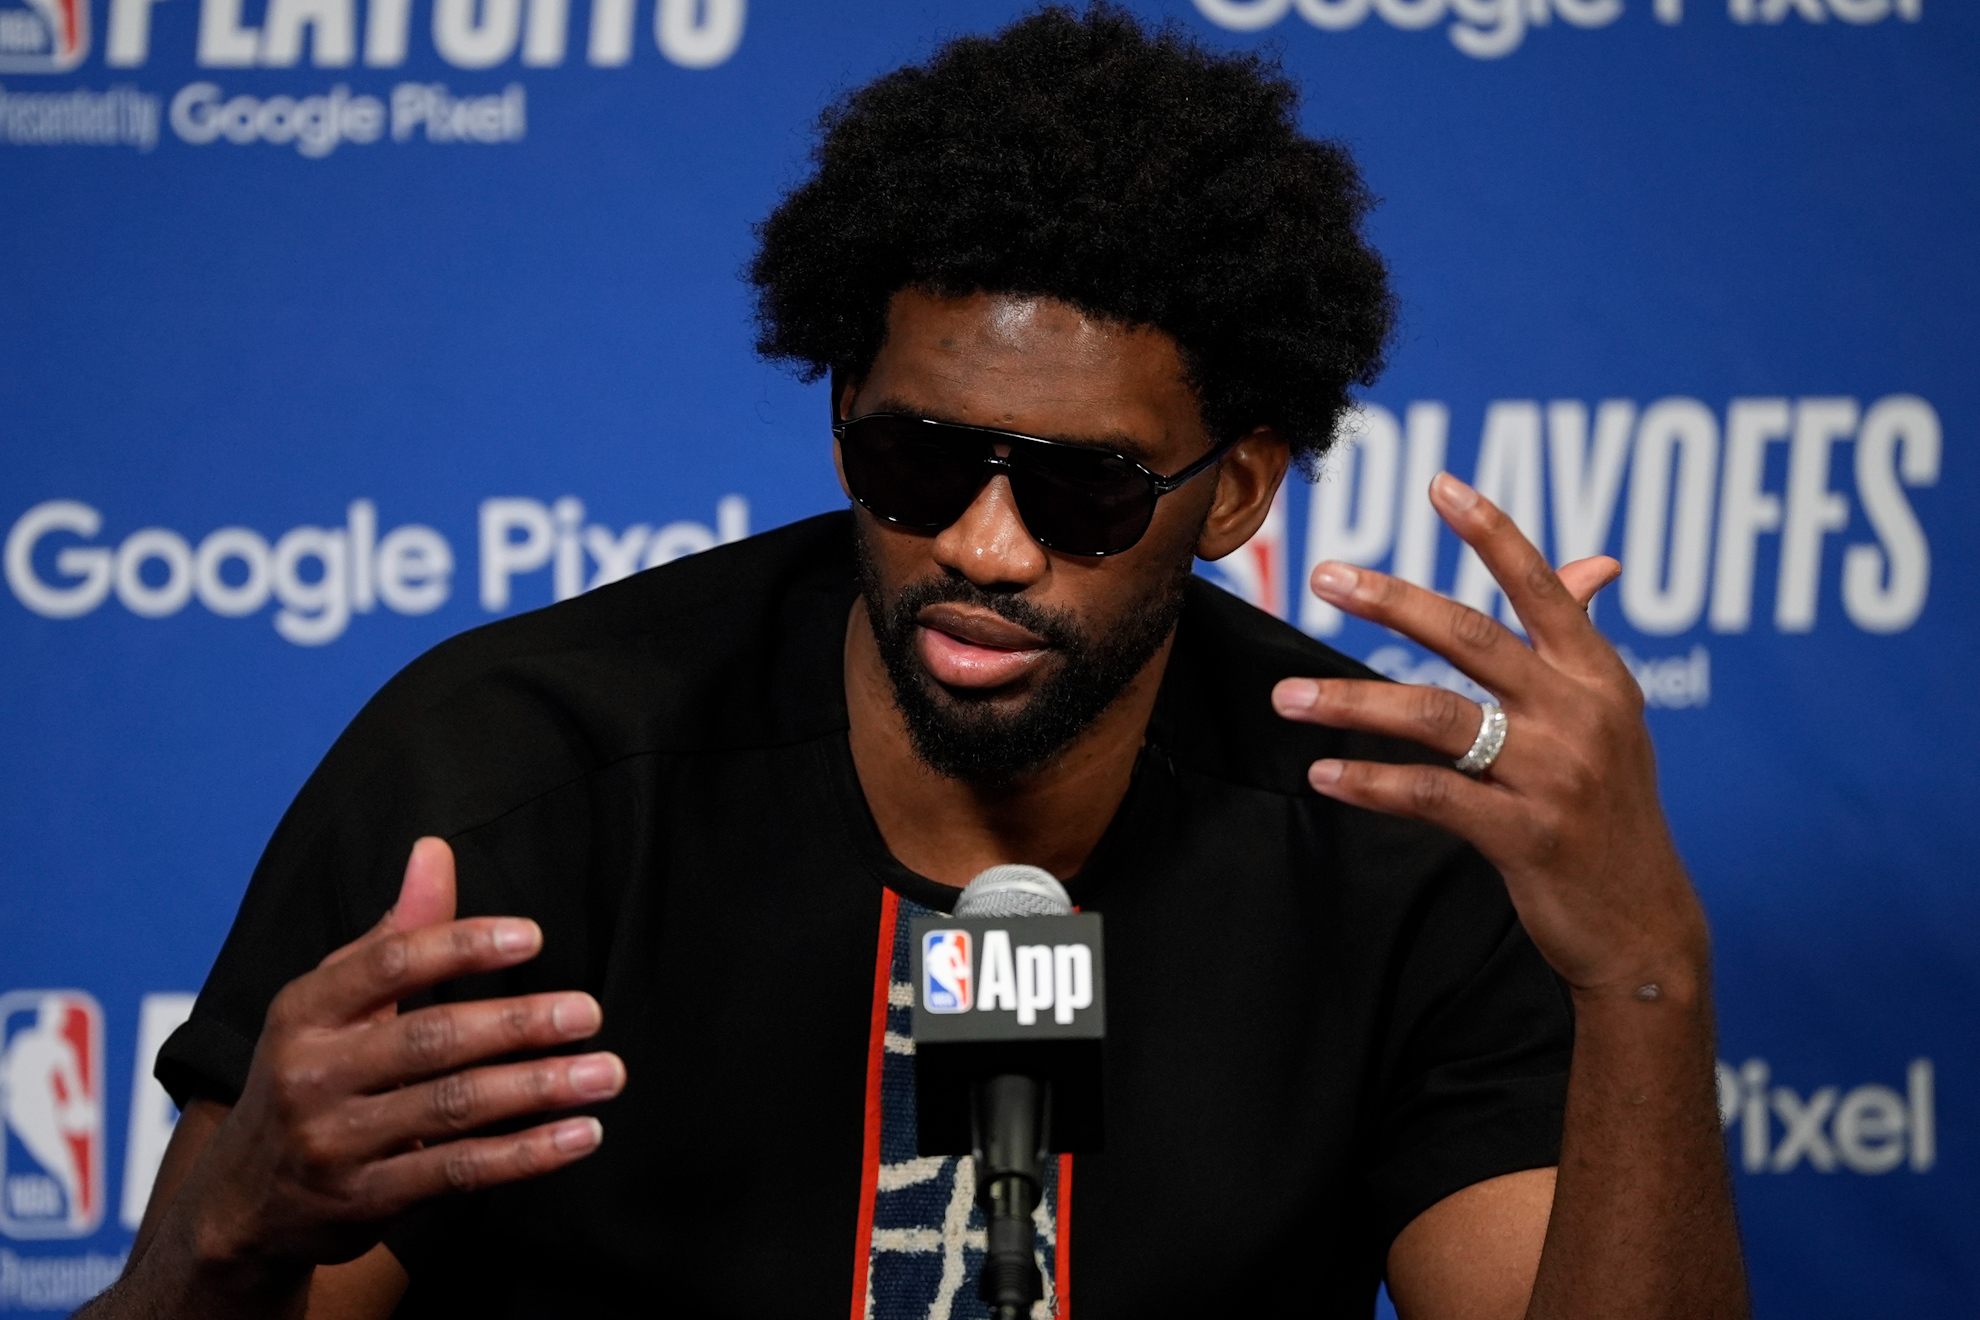 Joel Embiid says he was diagnosed with Bells palsy before the playoffs started